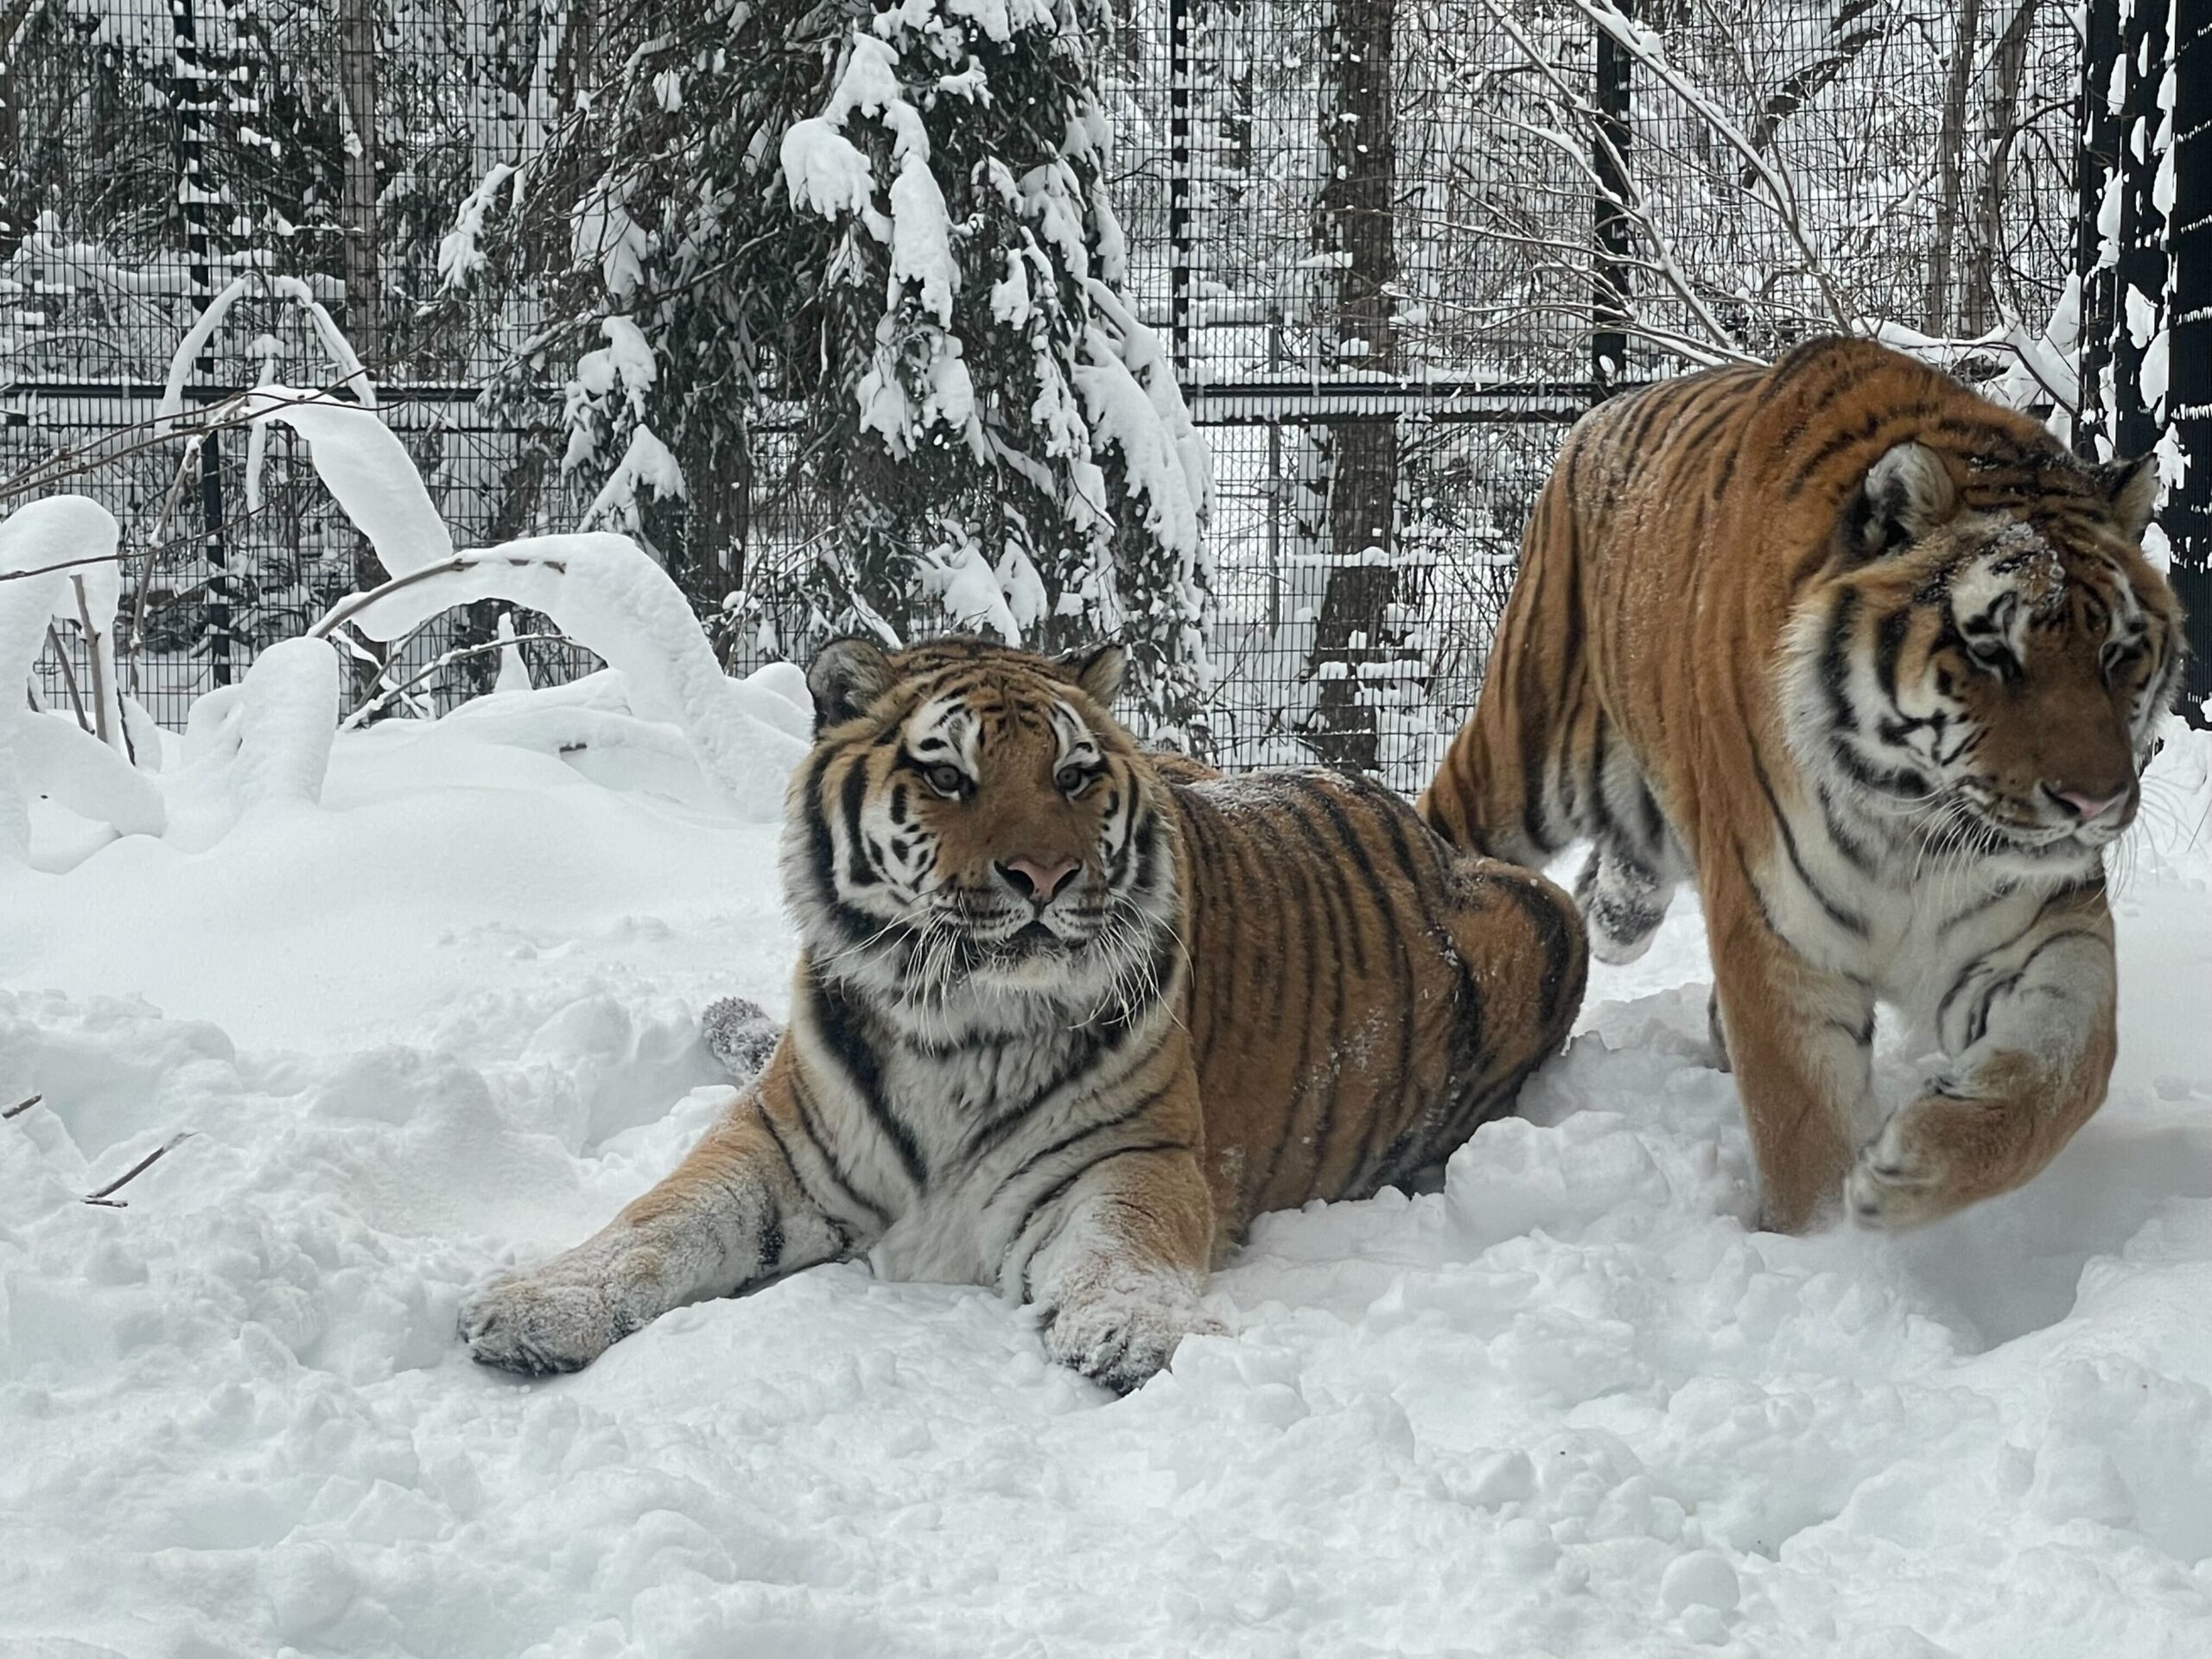 Two tigers in snow